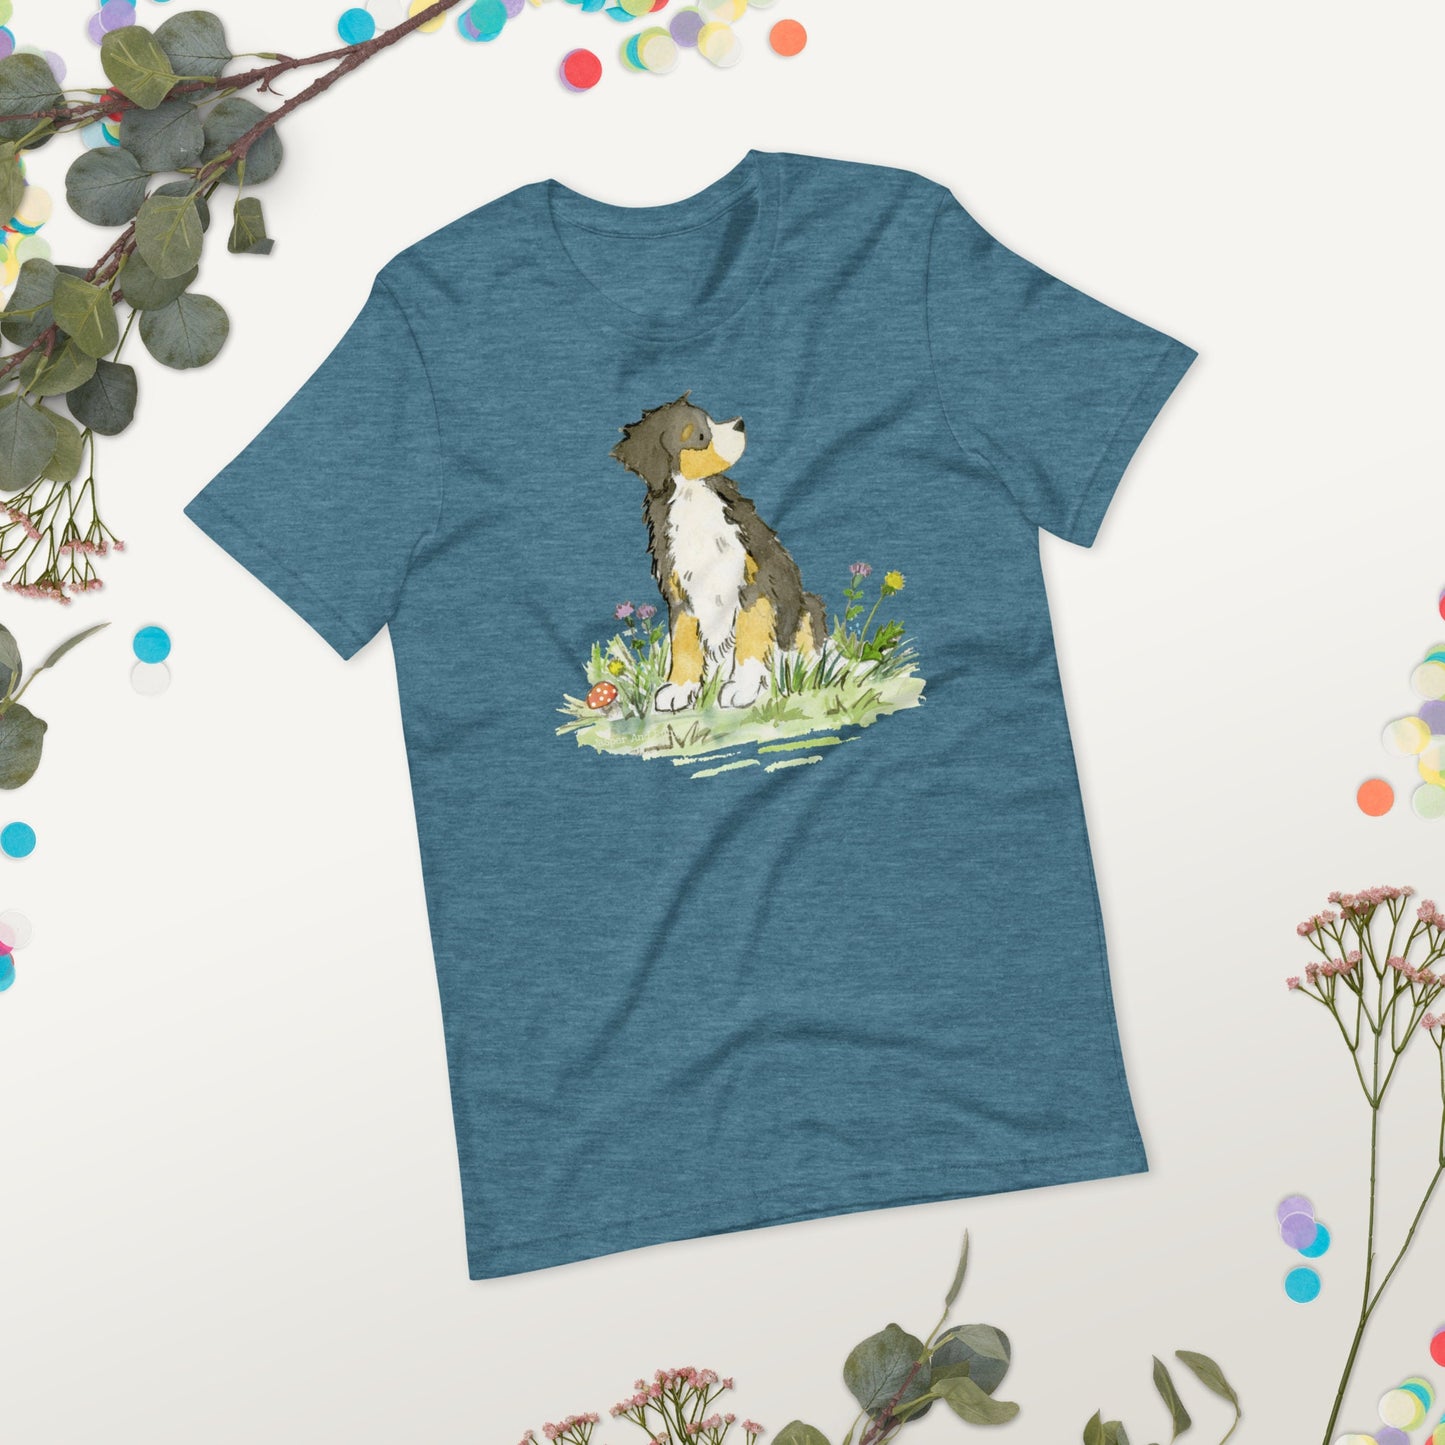 Teal t-shirt with cute Bernese mountain dog artwork on it.